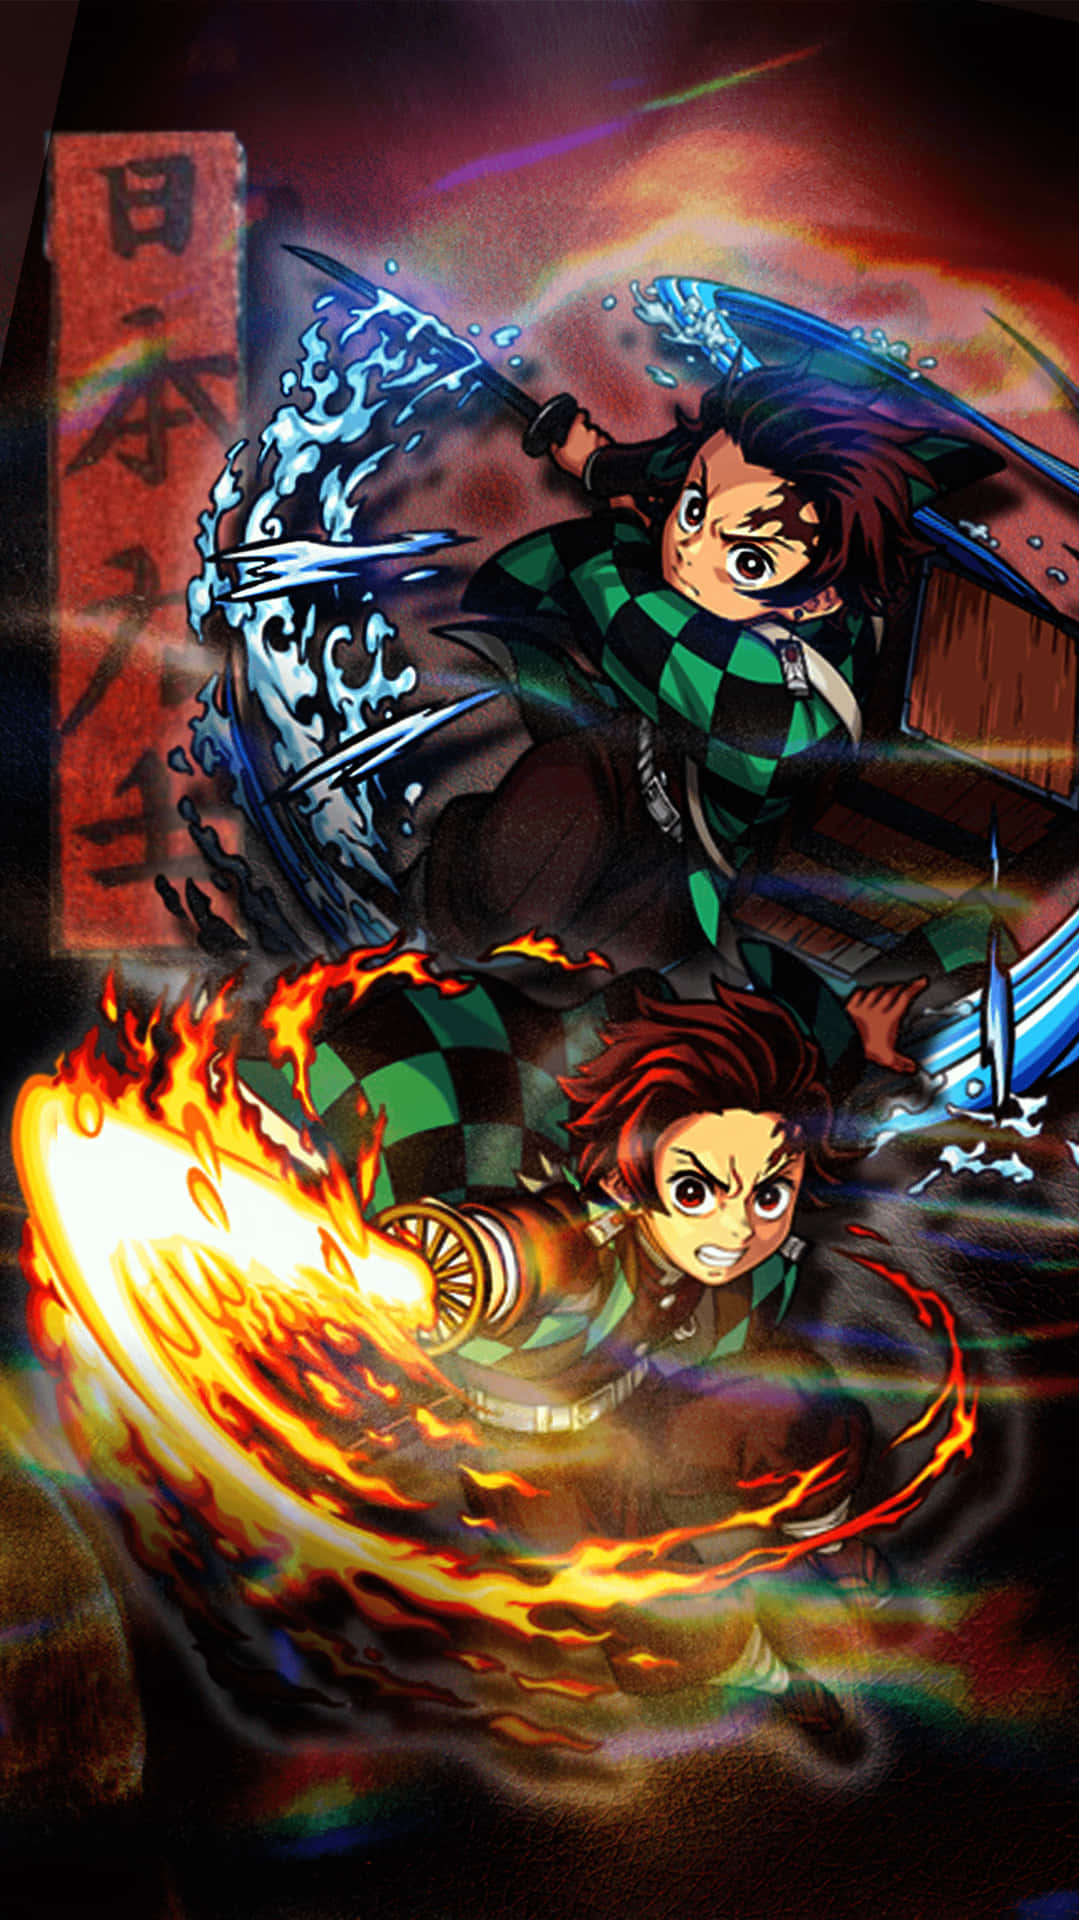 Get into the fight with the #Demon Slayer iPhone 11 Wallpaper